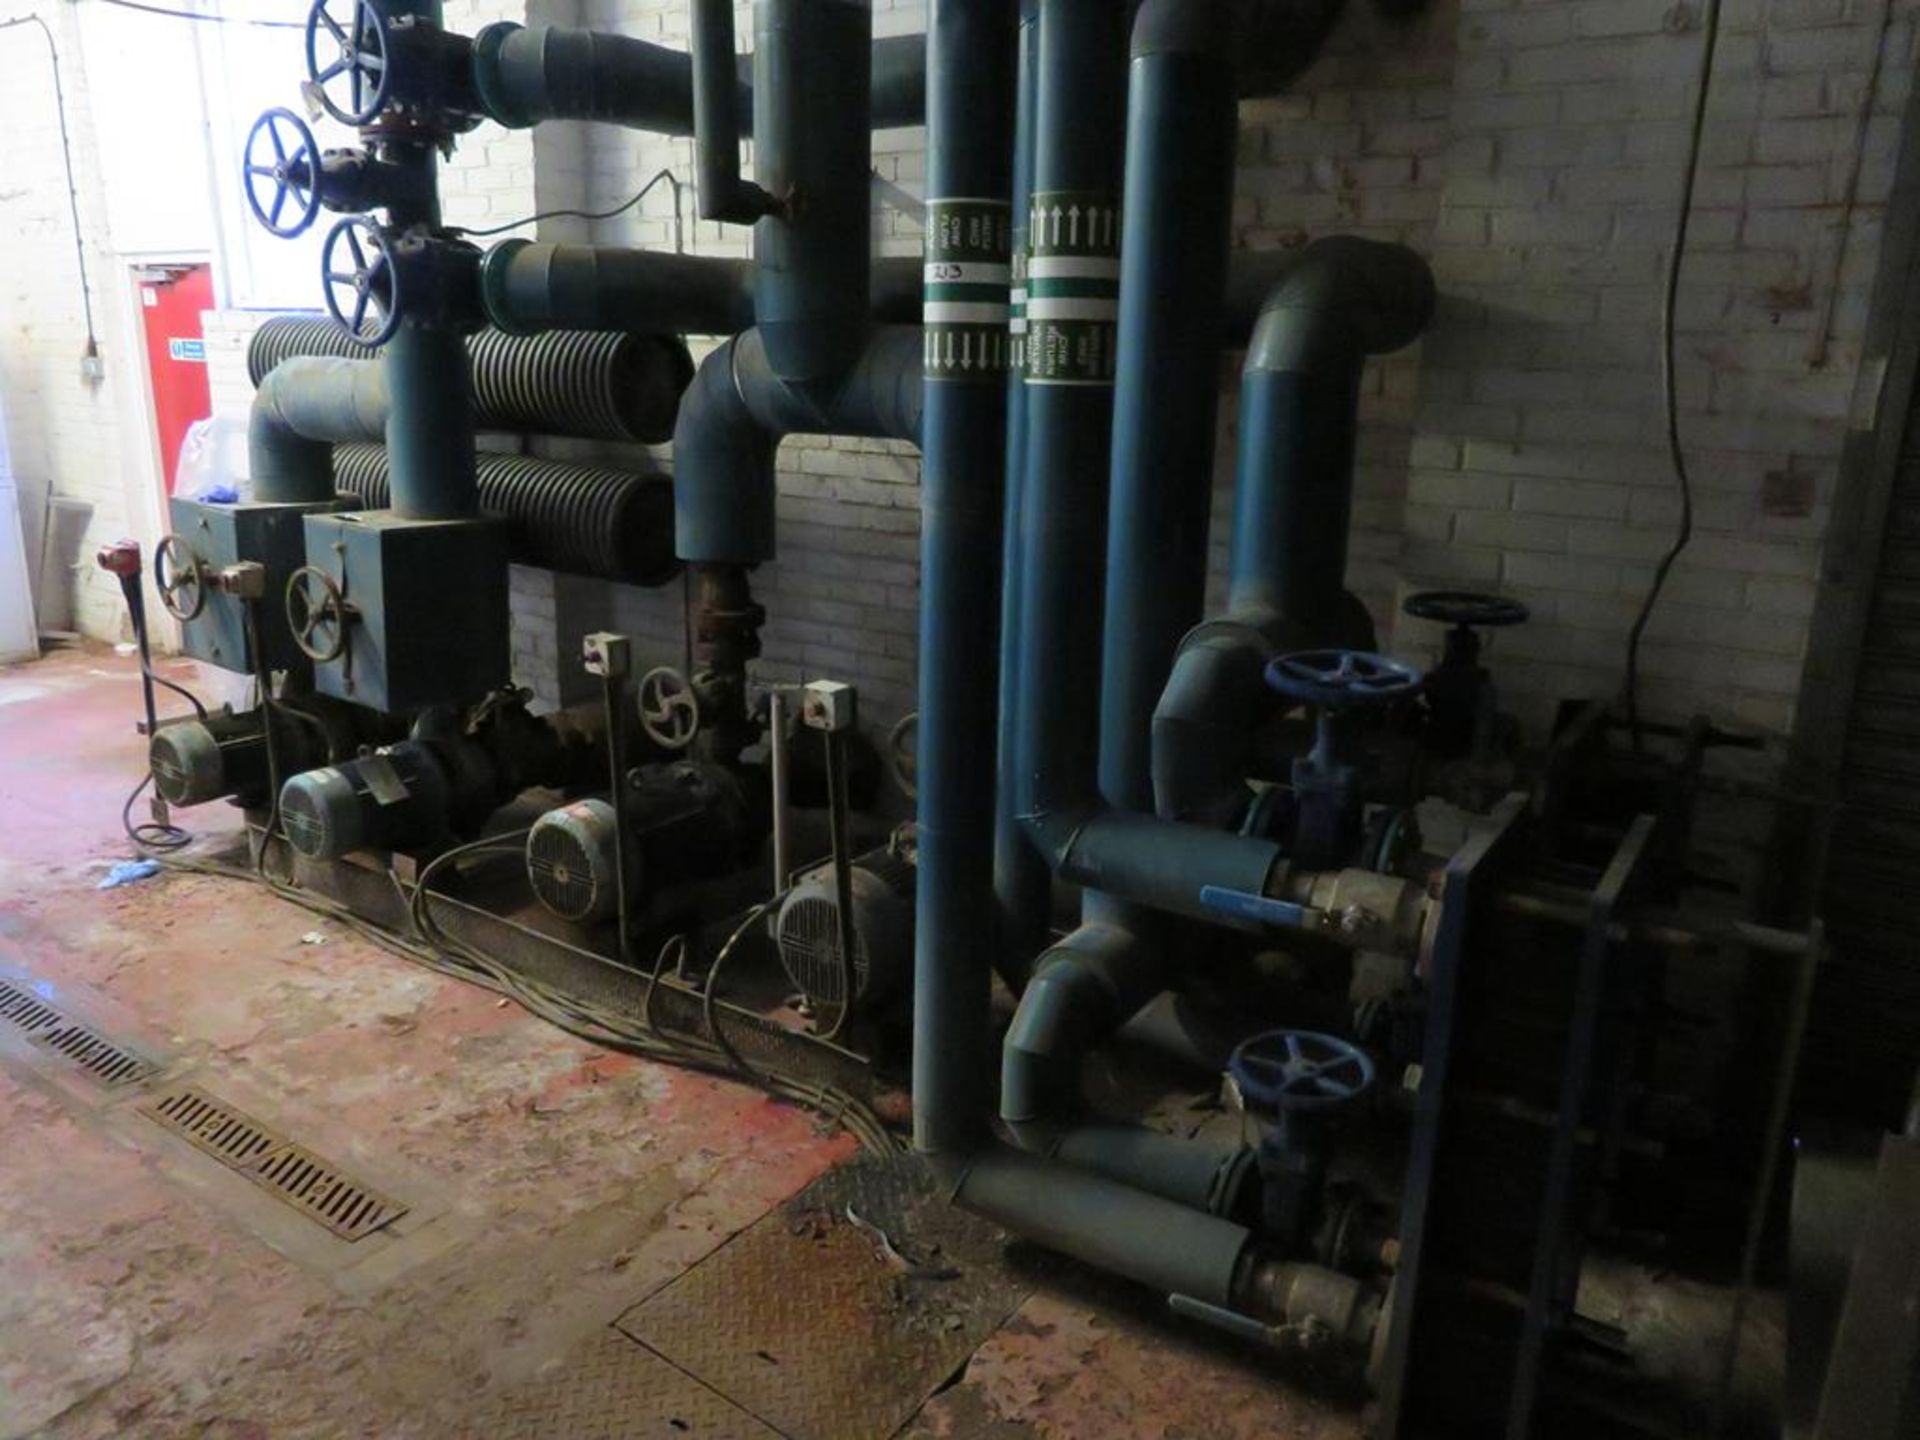 Chilled Water Distribution System Inc. 4x Pumps, 11x Valves, 2x Heat Exchangers and Connected Pipewo - Image 2 of 7